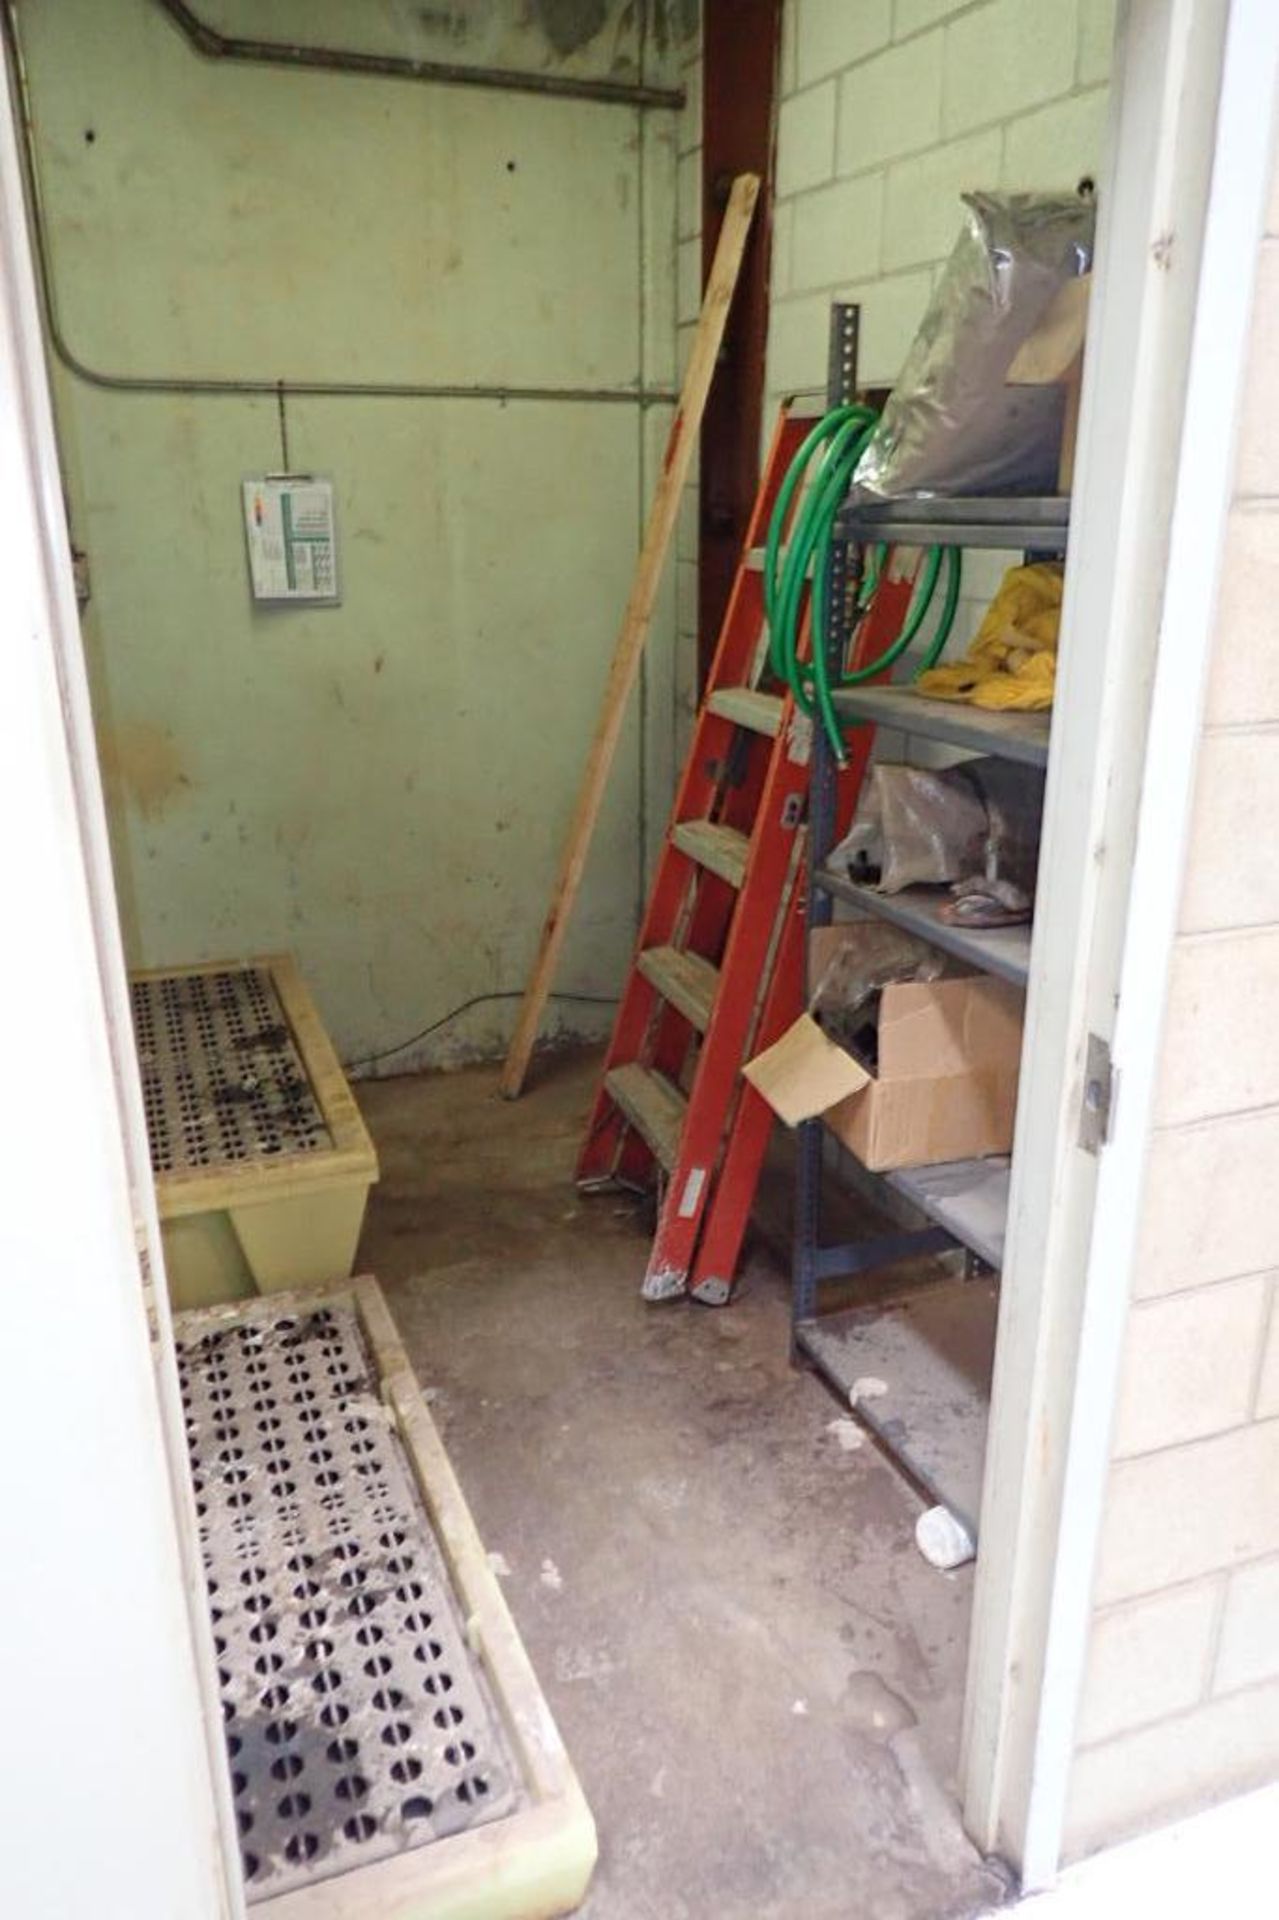 Contents of chemical supply room, Werner 6 ft. ladder, spill containment, shelf of parts.. **Rigging